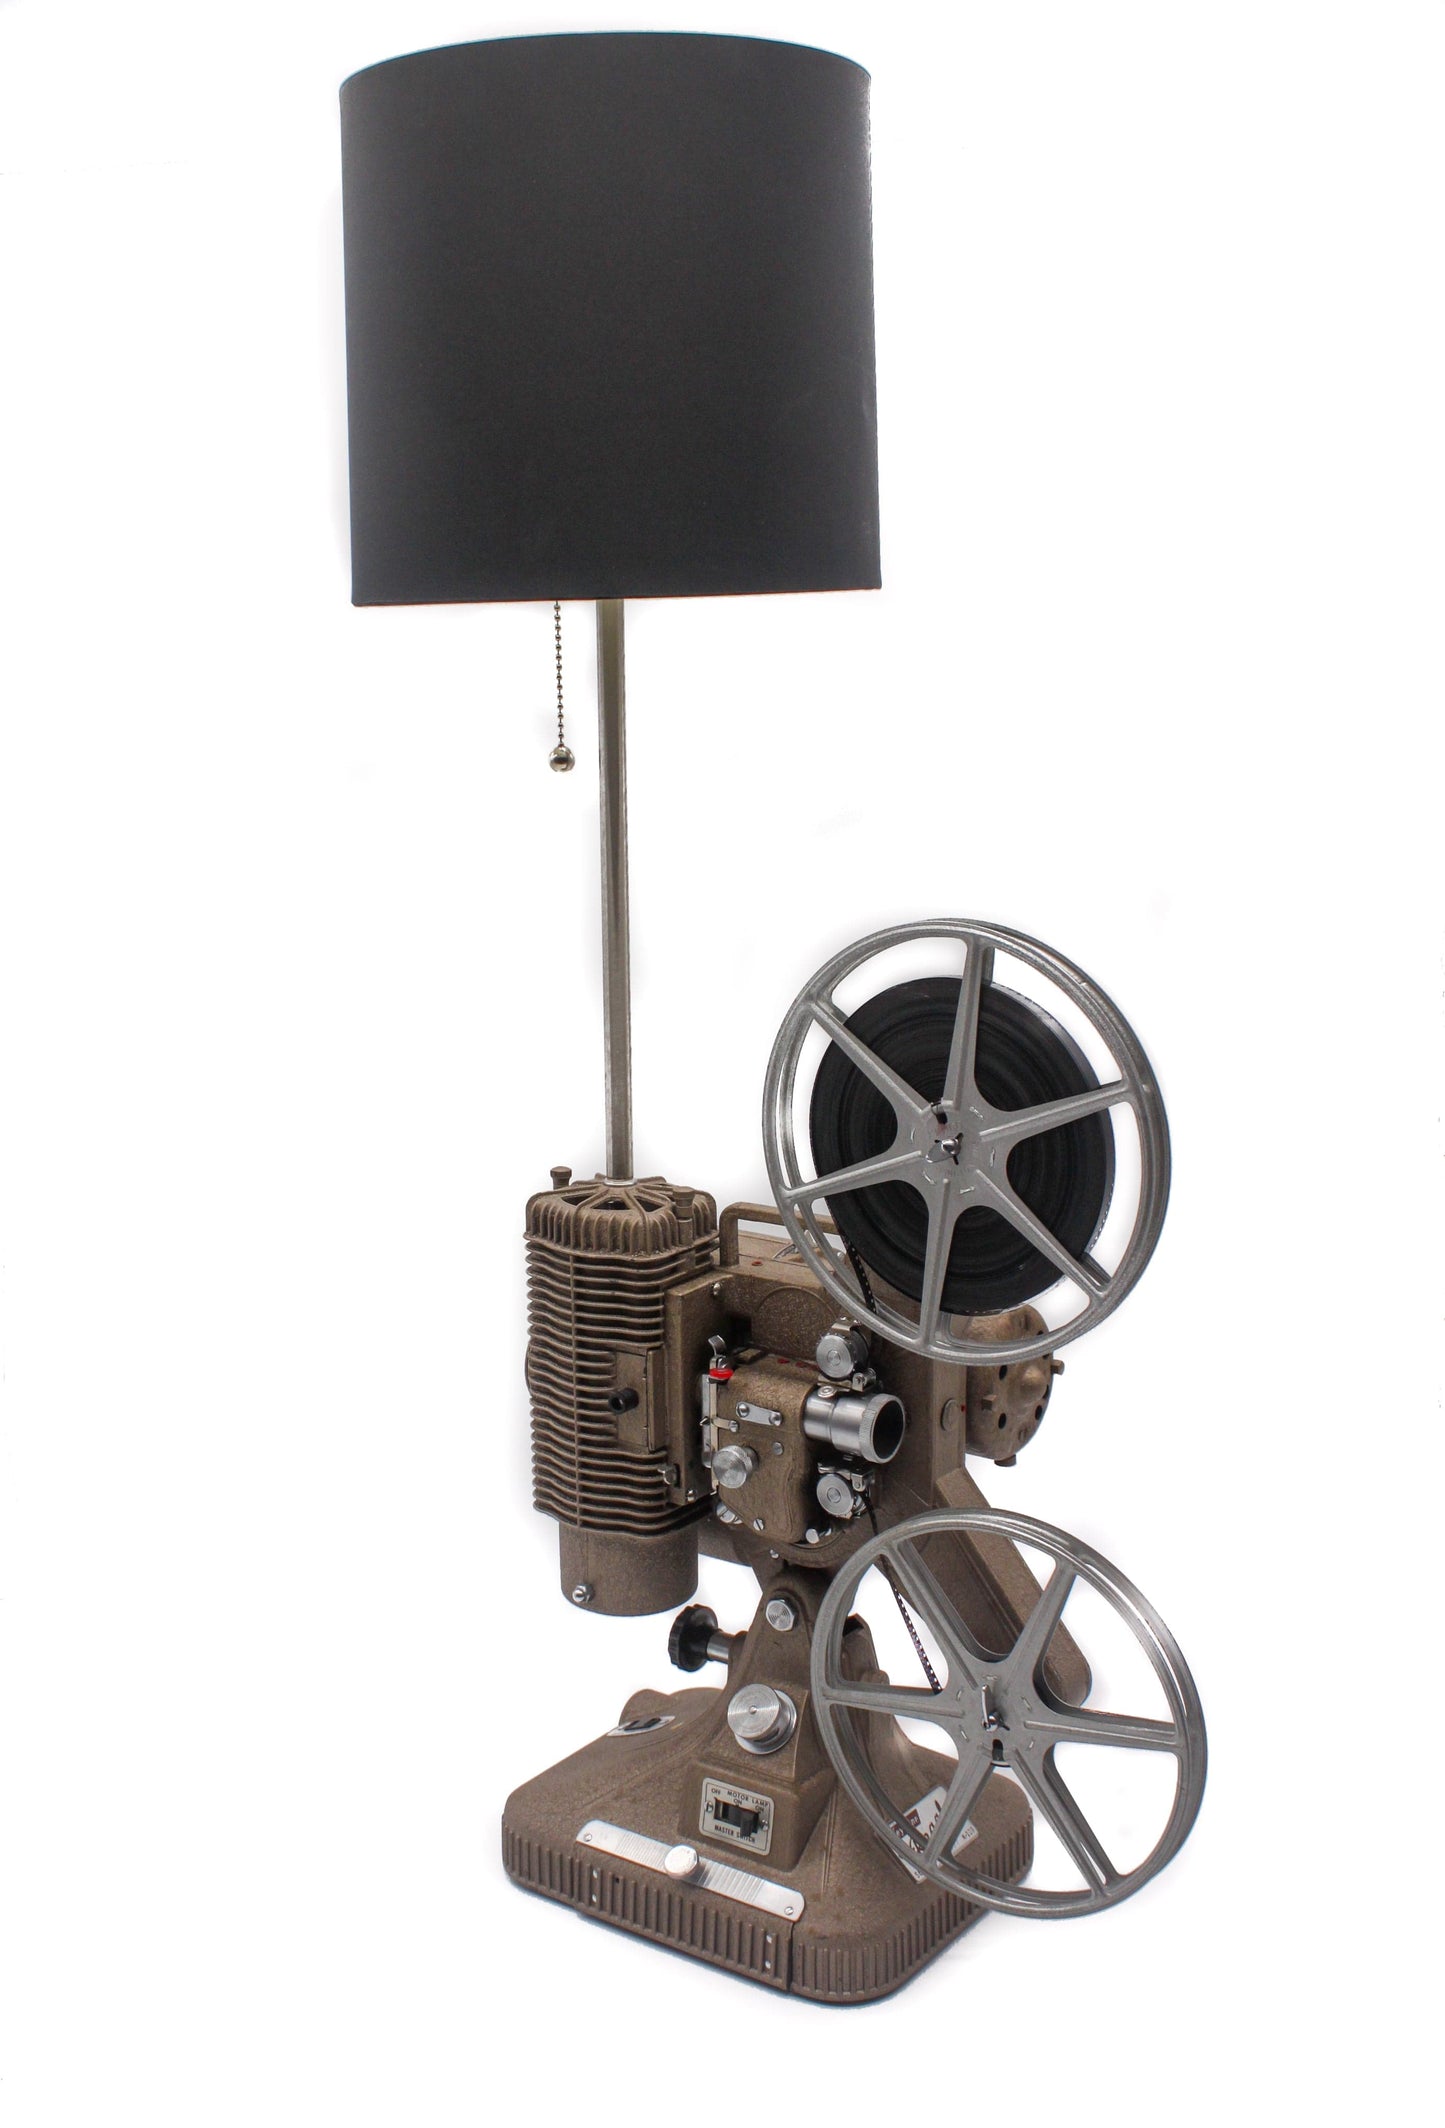 LightAndTimeArt Projector Lamp Vintage Table / Desk Lamp, Keystone Projector Lamp, Hollywood & Movie Theater décor, Film Art, Movie room, Home Theater , Film Maker Gift